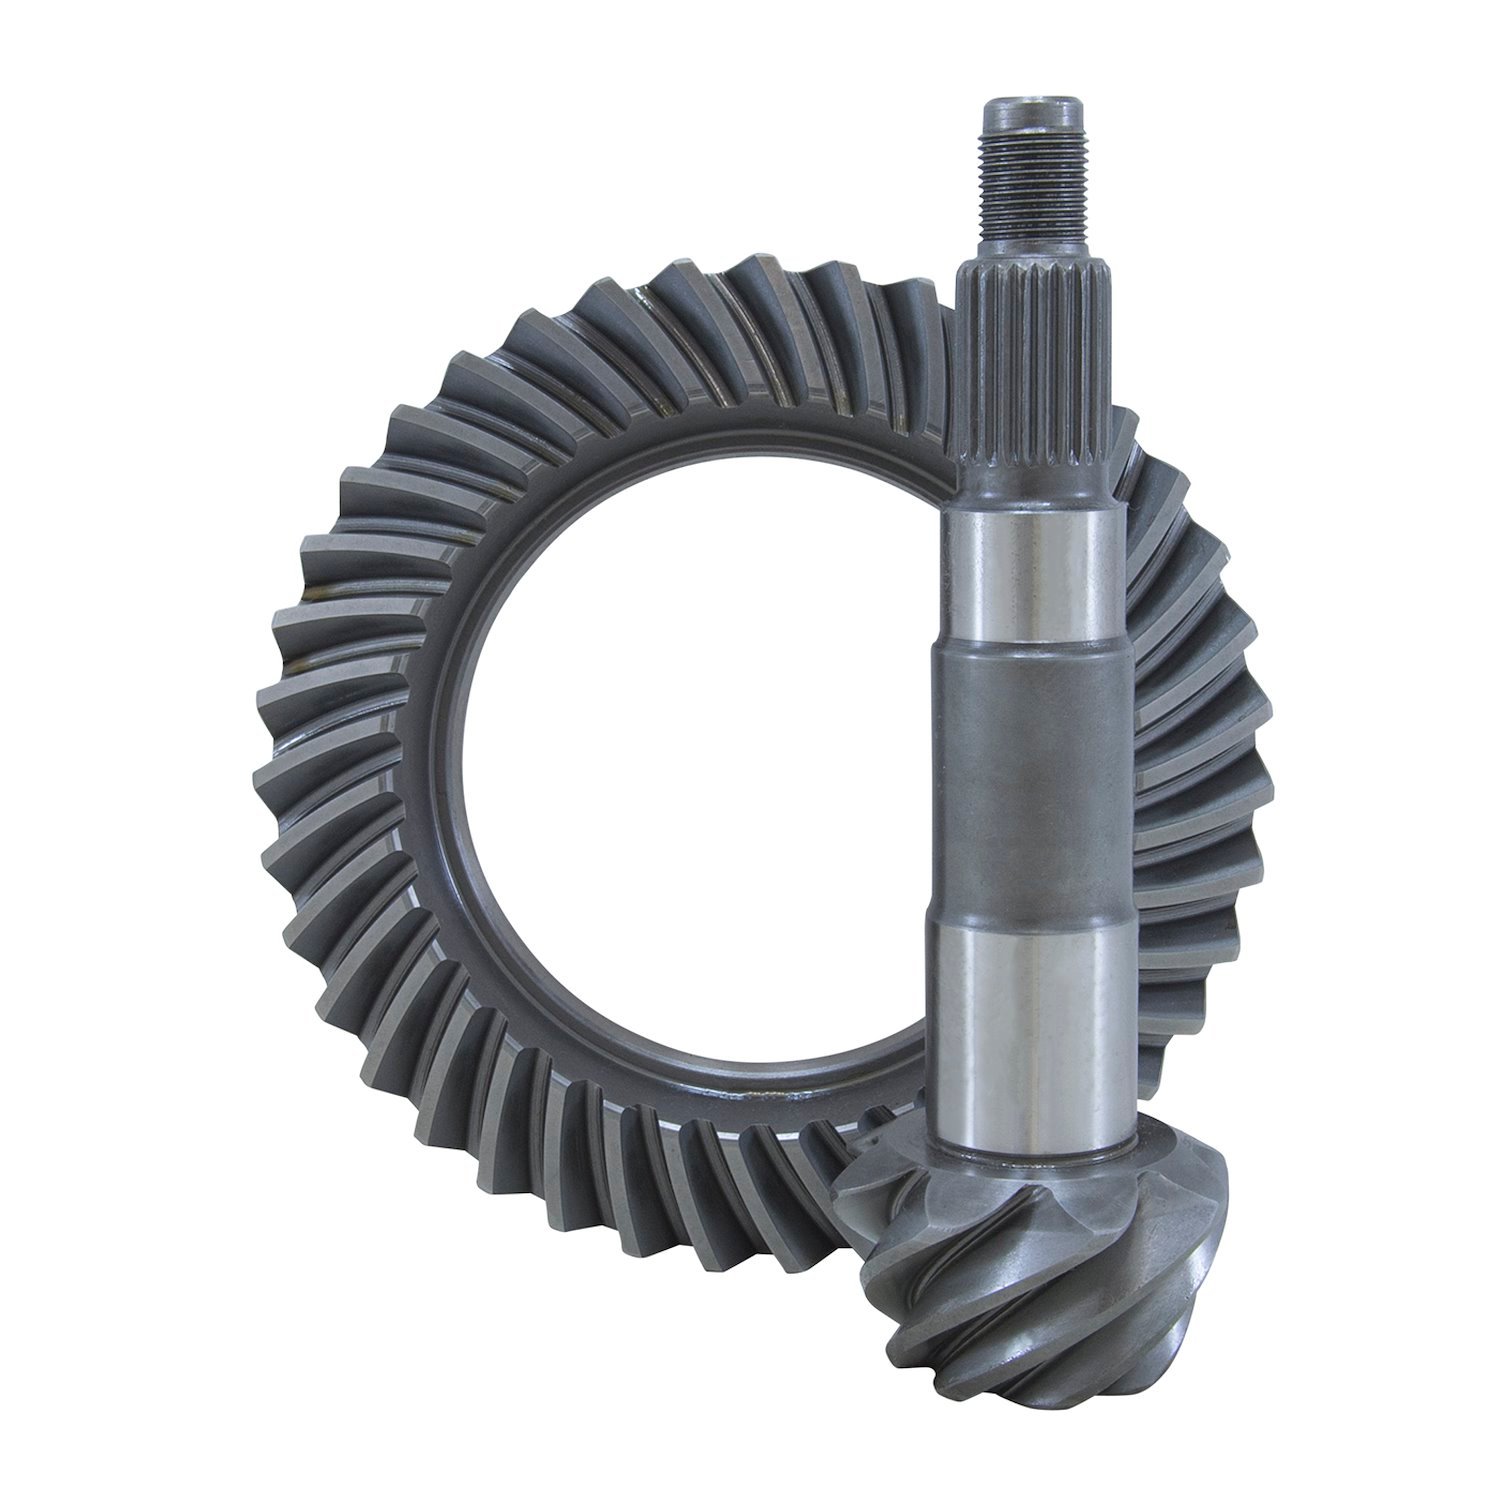 USA Standard 36246 Ring & Pinion Gear Set, For Toyota 7.5 in. Reverse Rotation, 4.88 Ratio